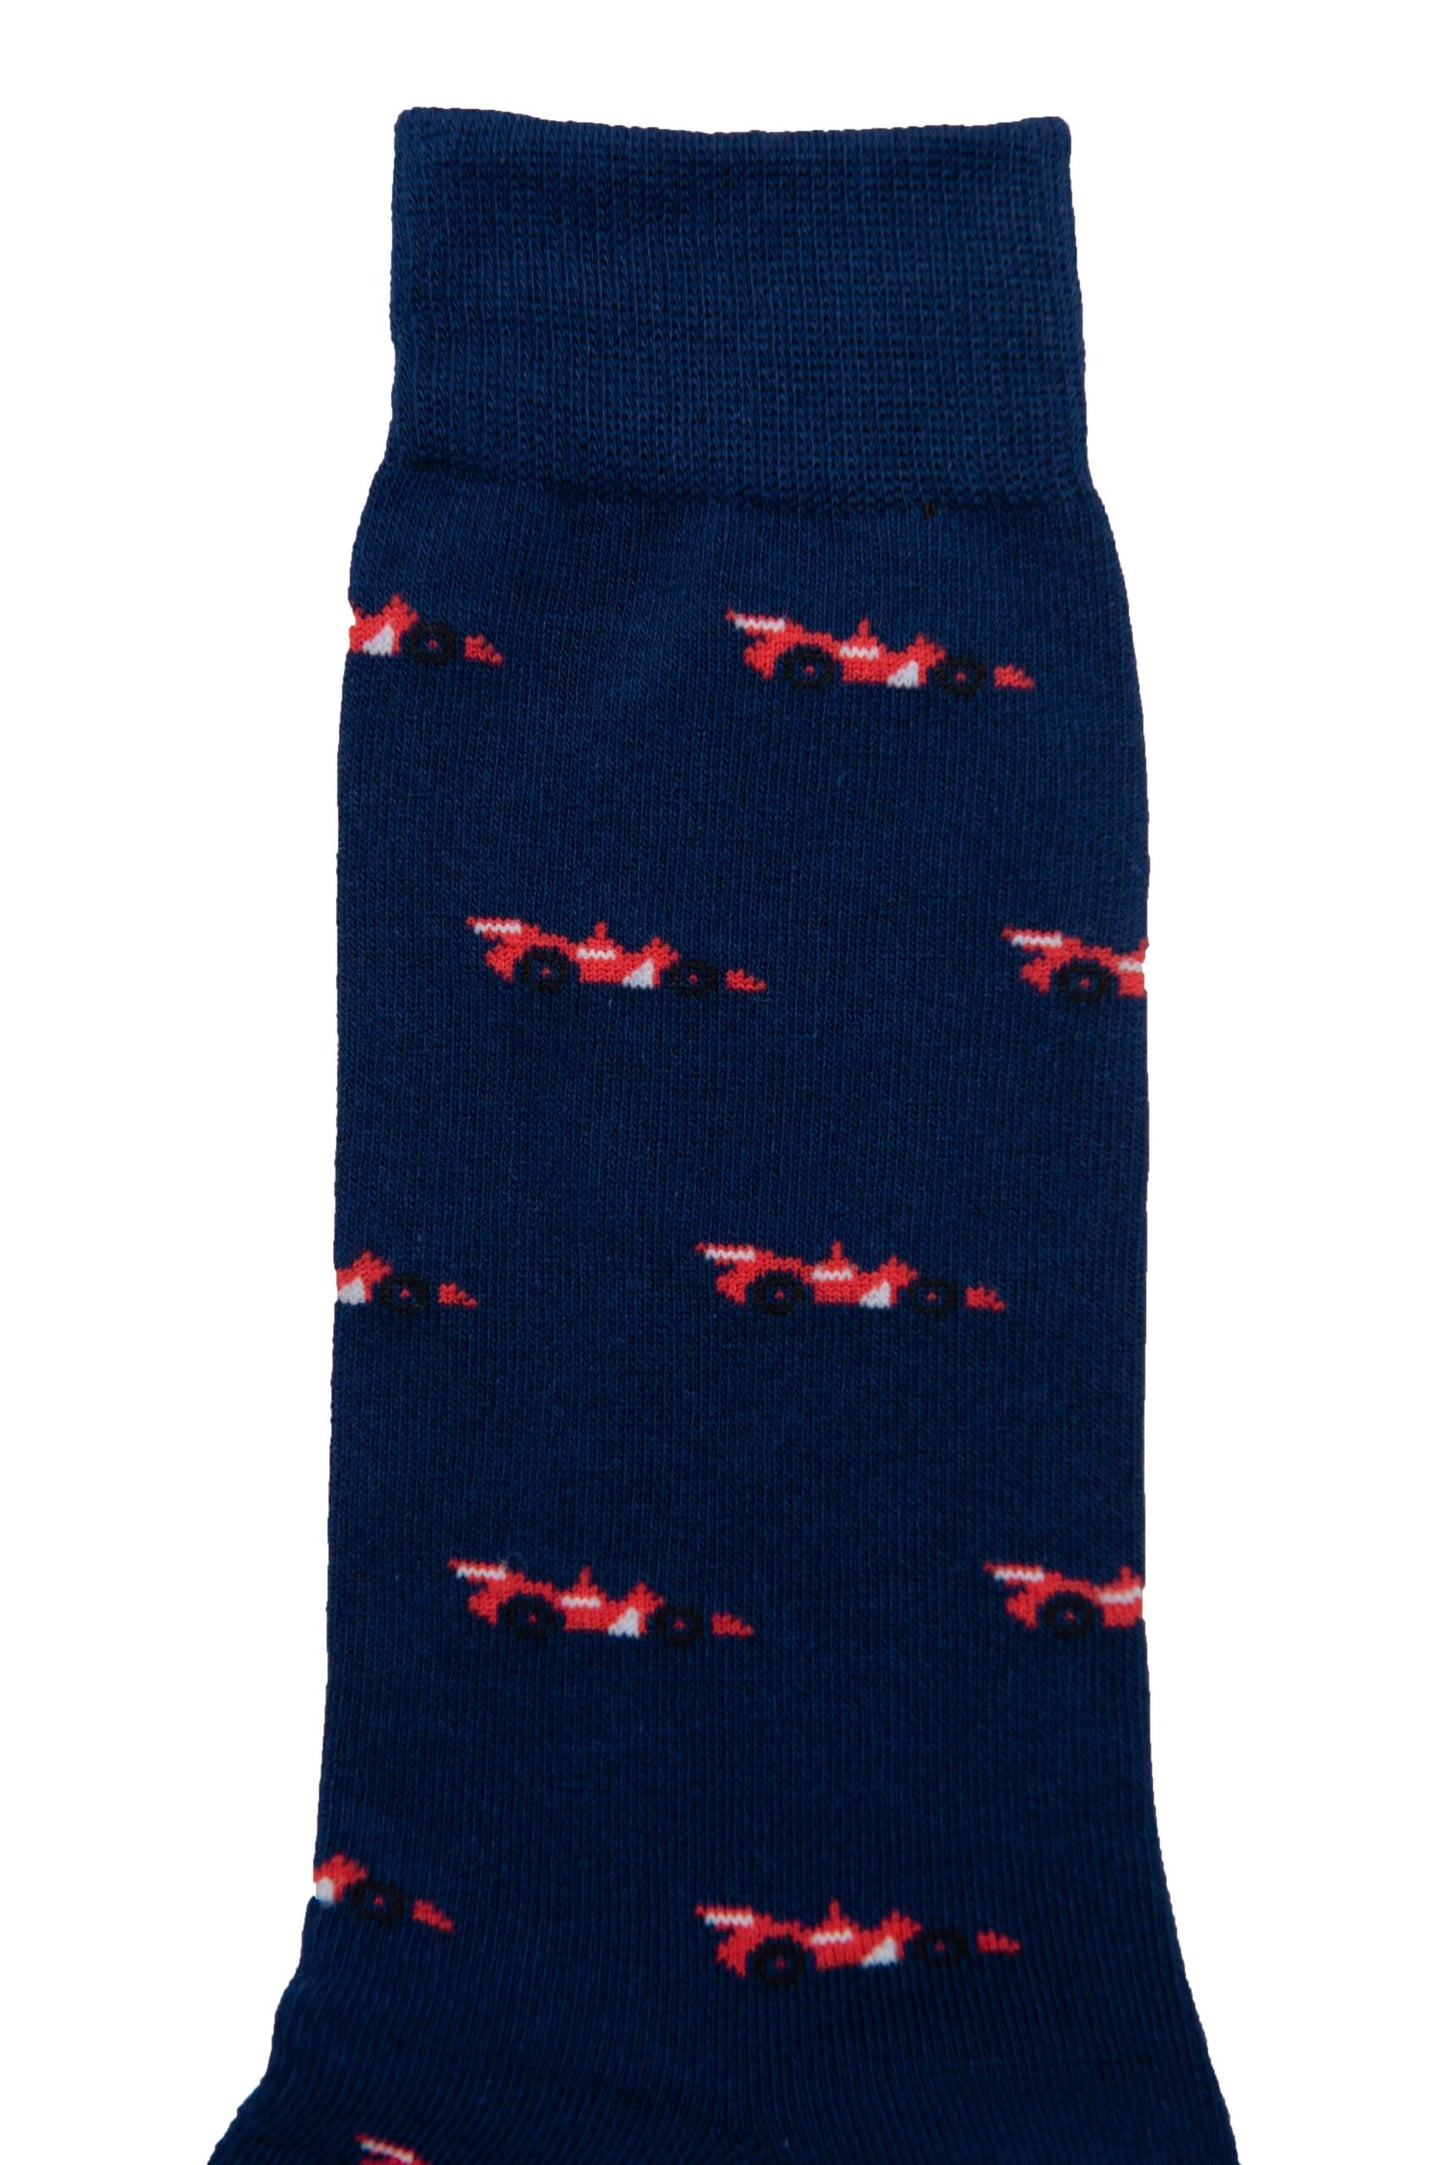 A pair of Racing Car socks with a sock game twist, featuring red and white airplanes to accelerate your style.